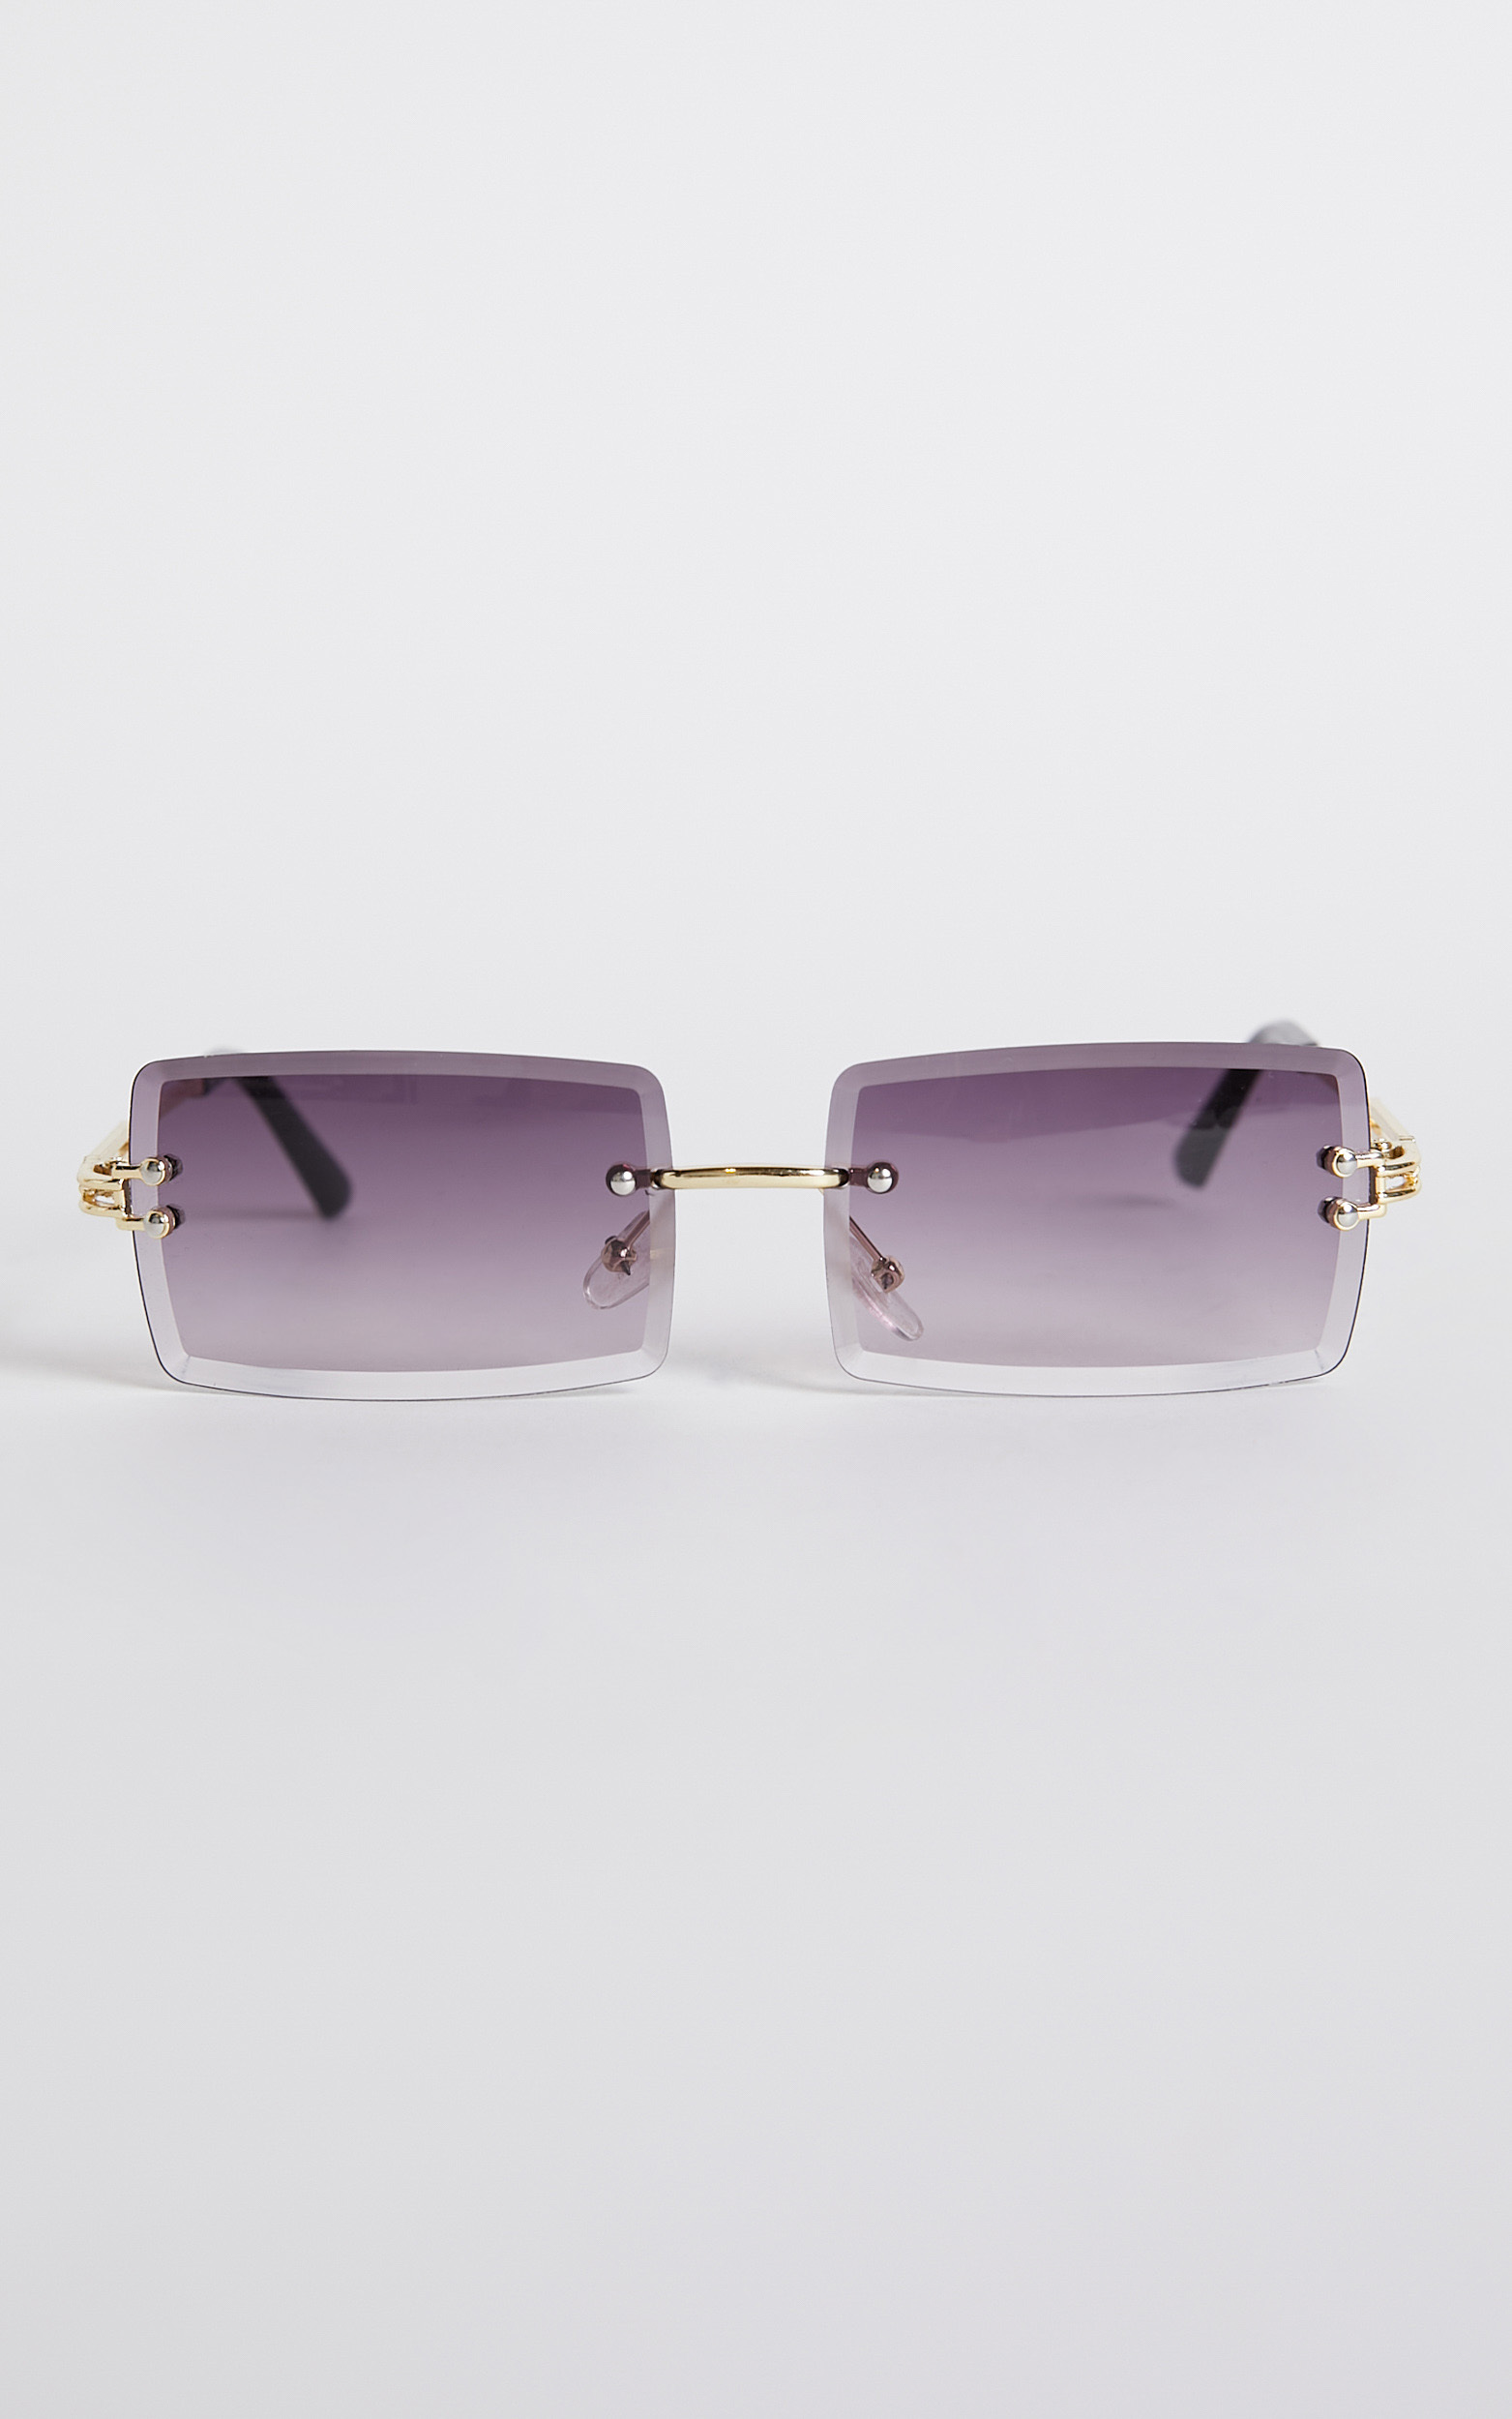 Shinji Sunglasses - Rimless Square Sunglasses in Pink Fade - NoSize, PNK2, hi-res image number null